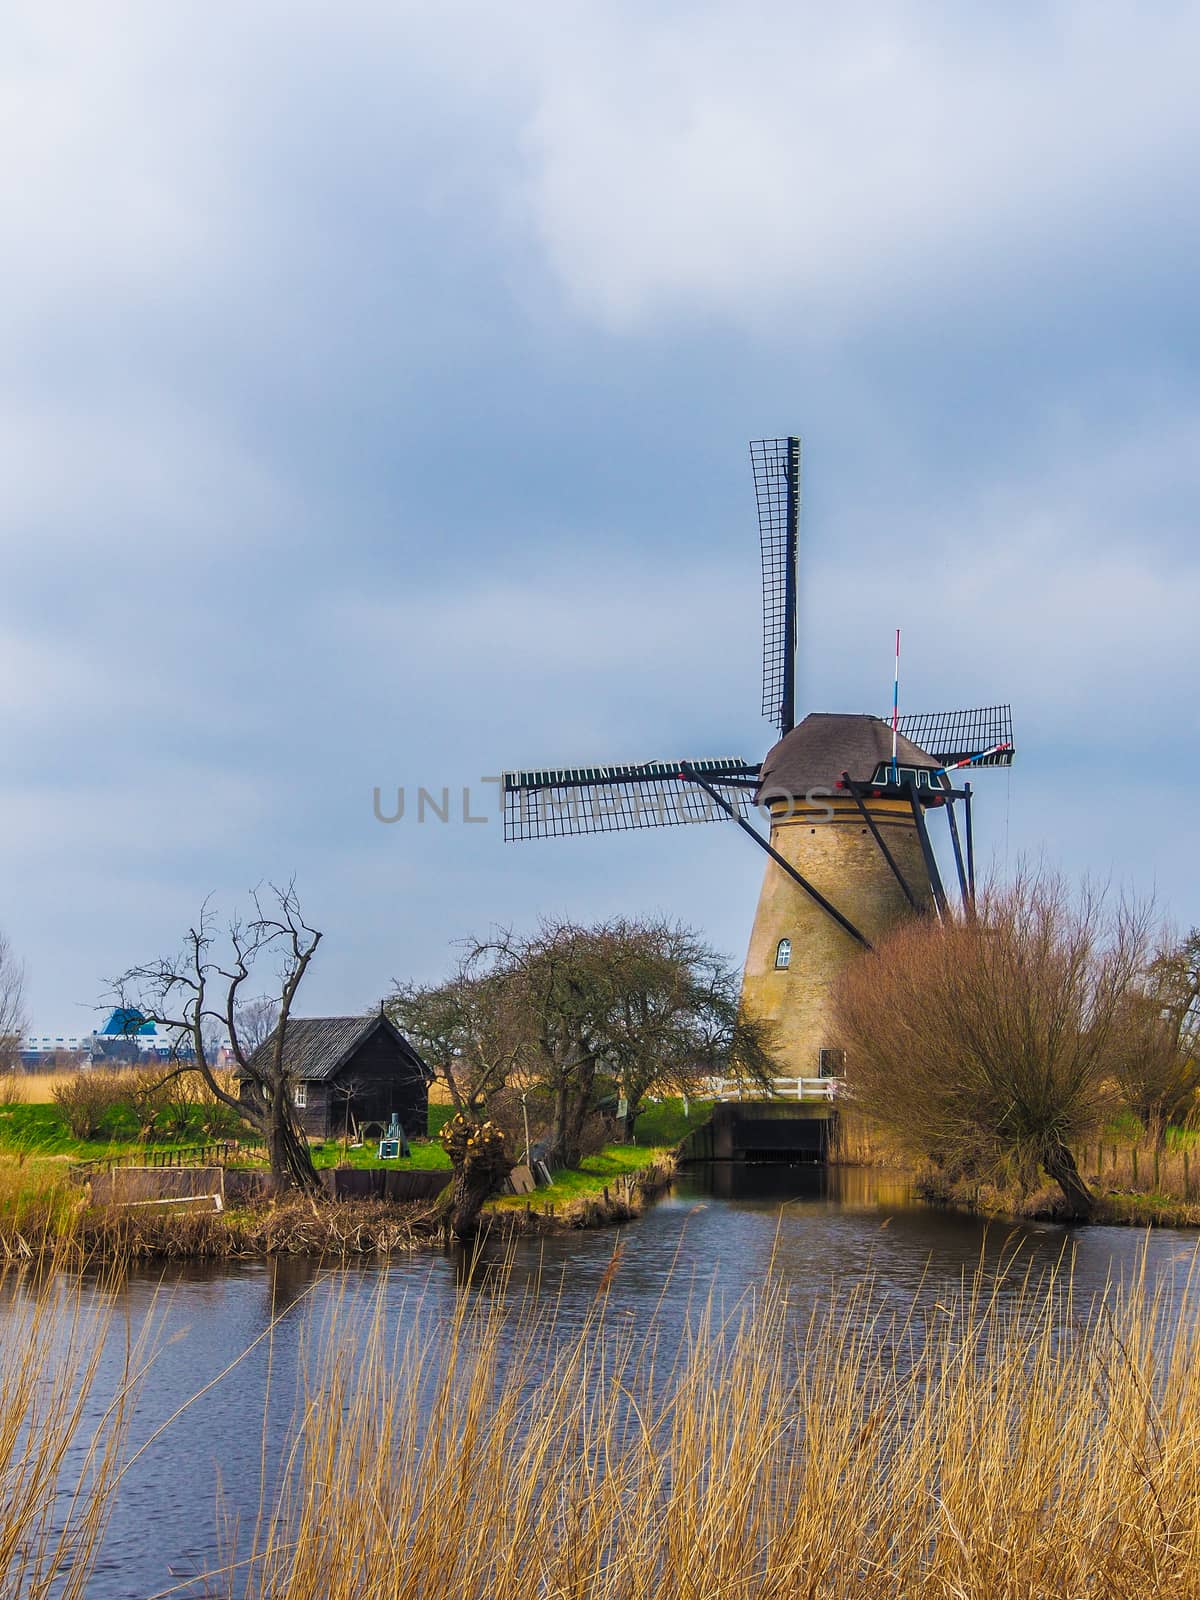 ROTTERDAM, NETHERLANDS - April 13, 2013 : The beautiful winter windmill landscape in the countryside of Netherlands